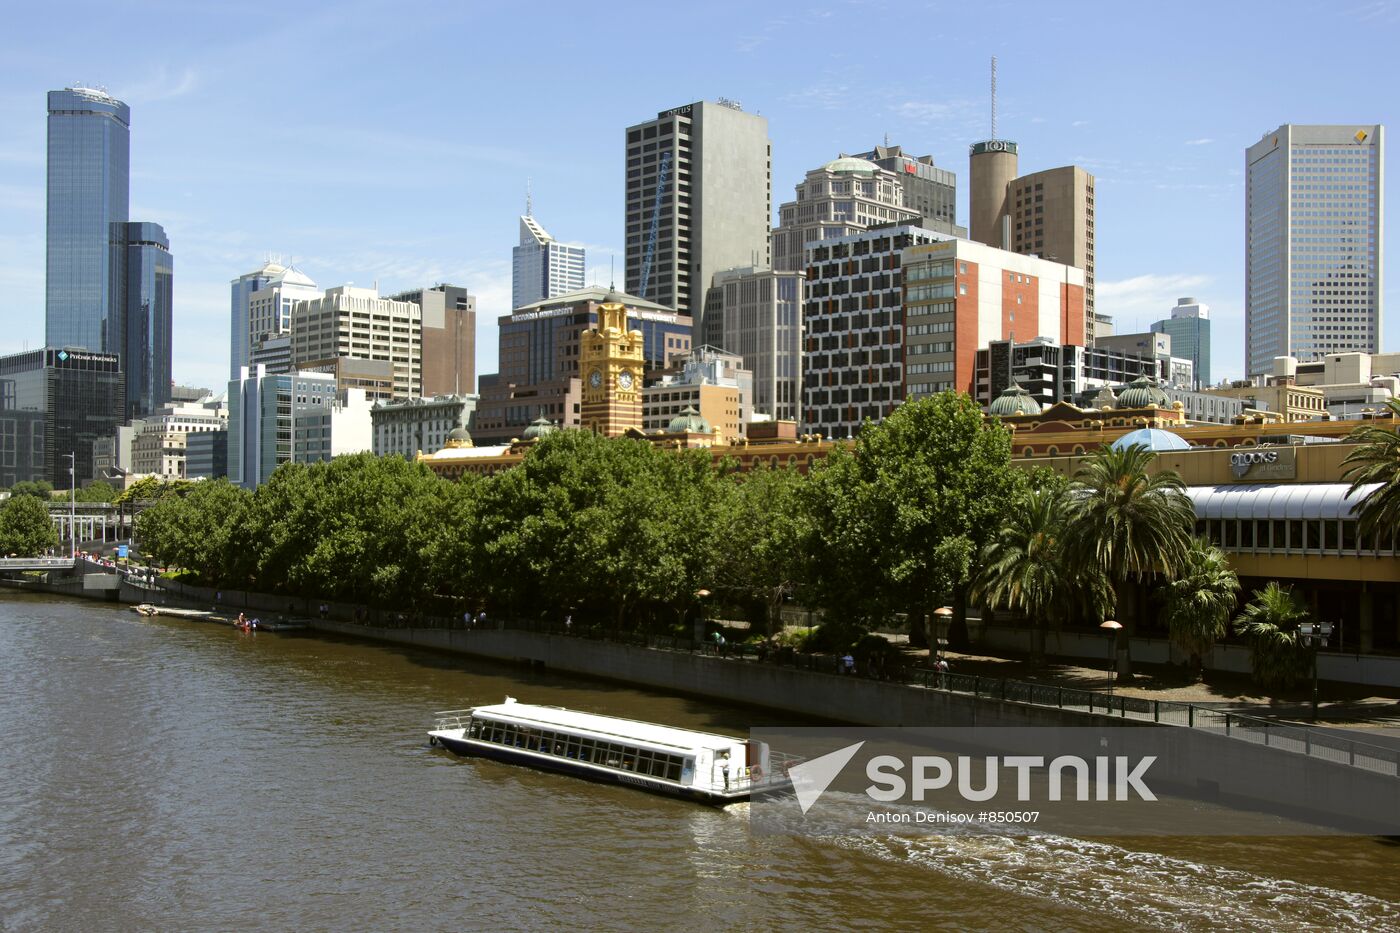 View of Melbourne from Yarra River